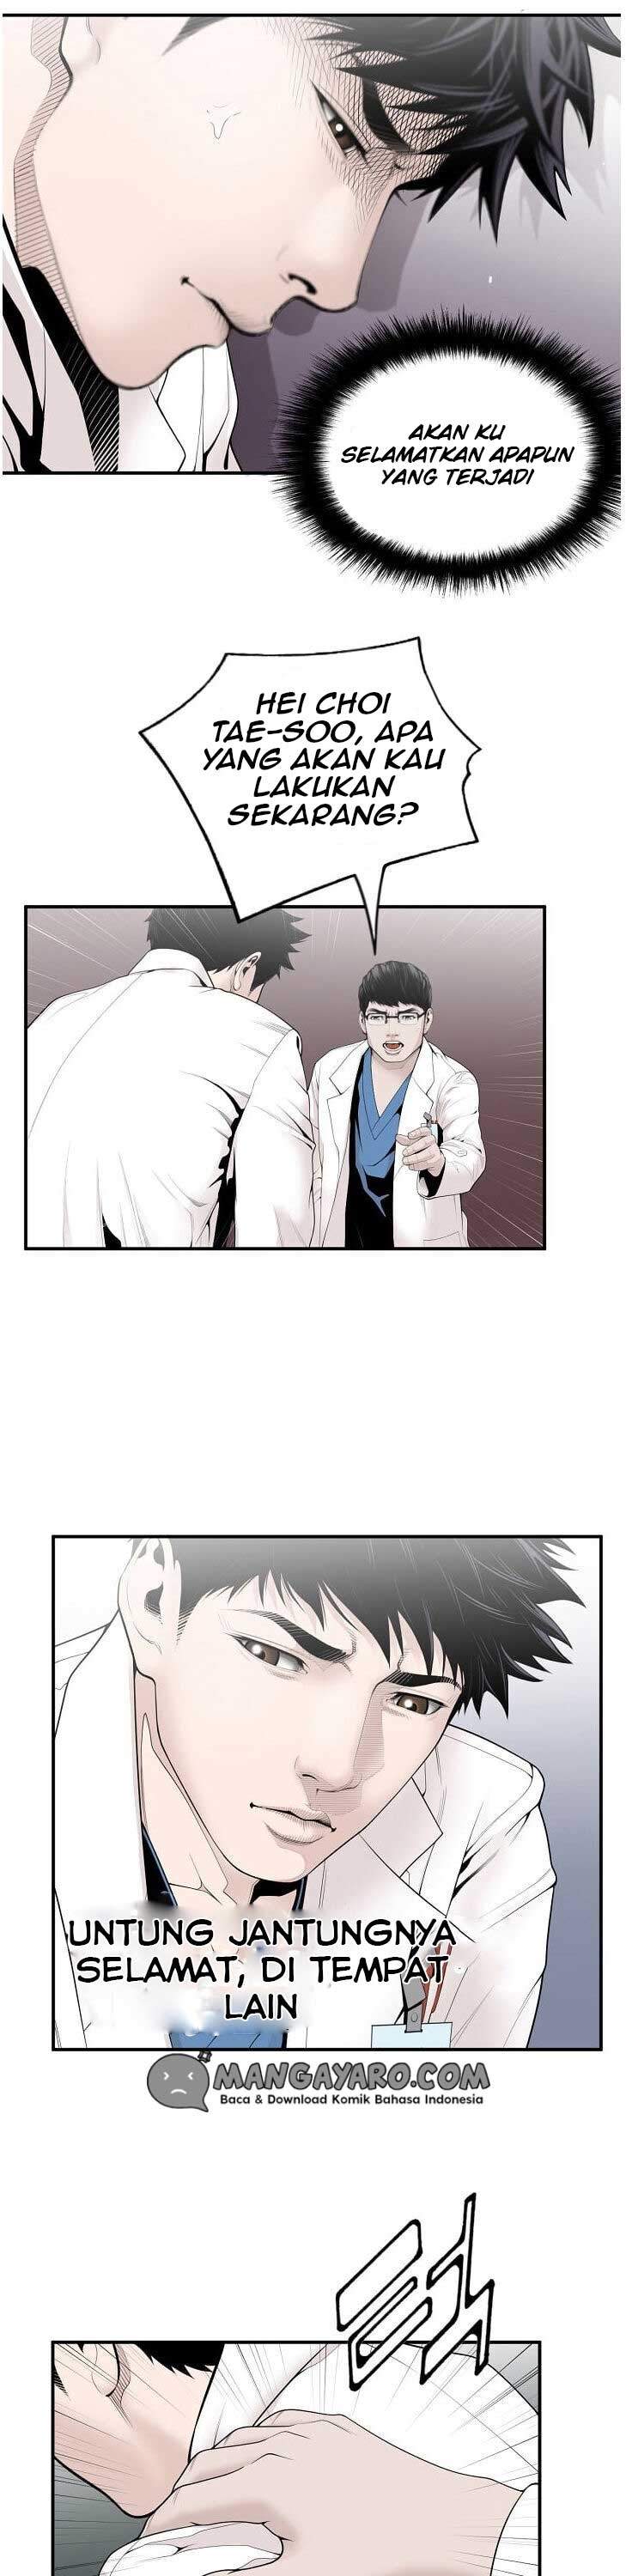 Dr. Choi Tae-Soo Chapter 9